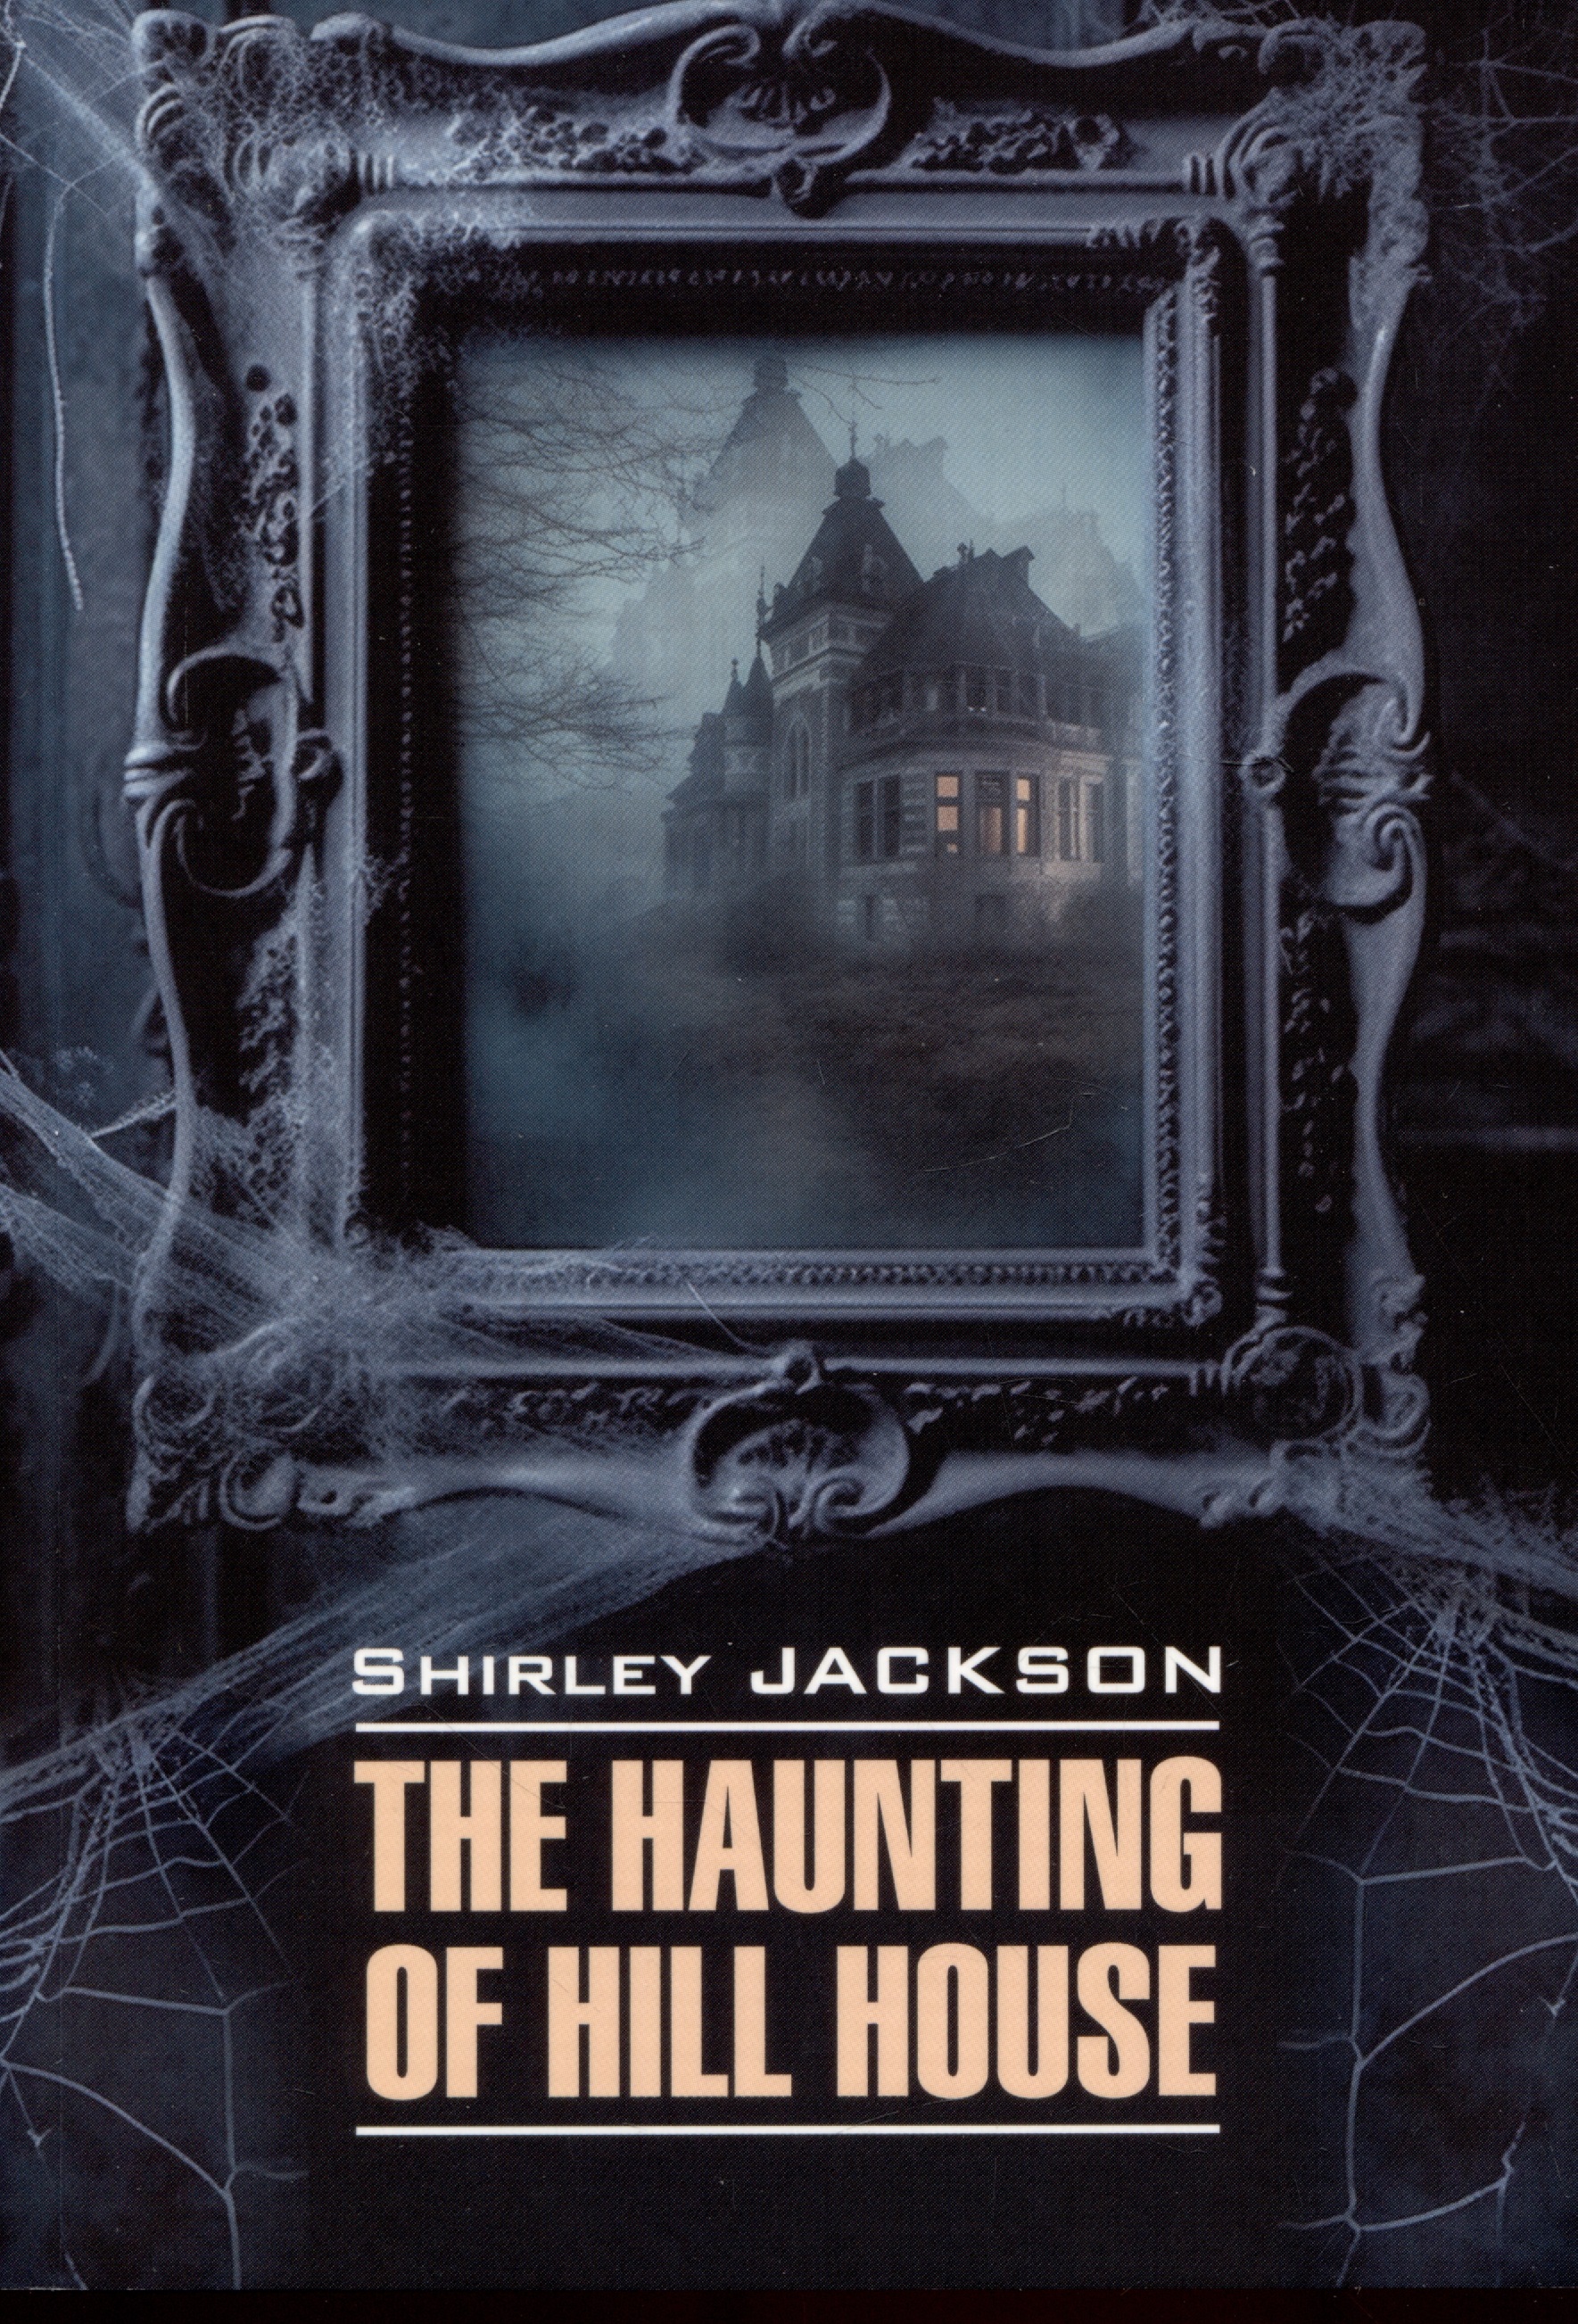 The Haunting of Hill House / Призрак дома на холме jackson s the haunting of hill house